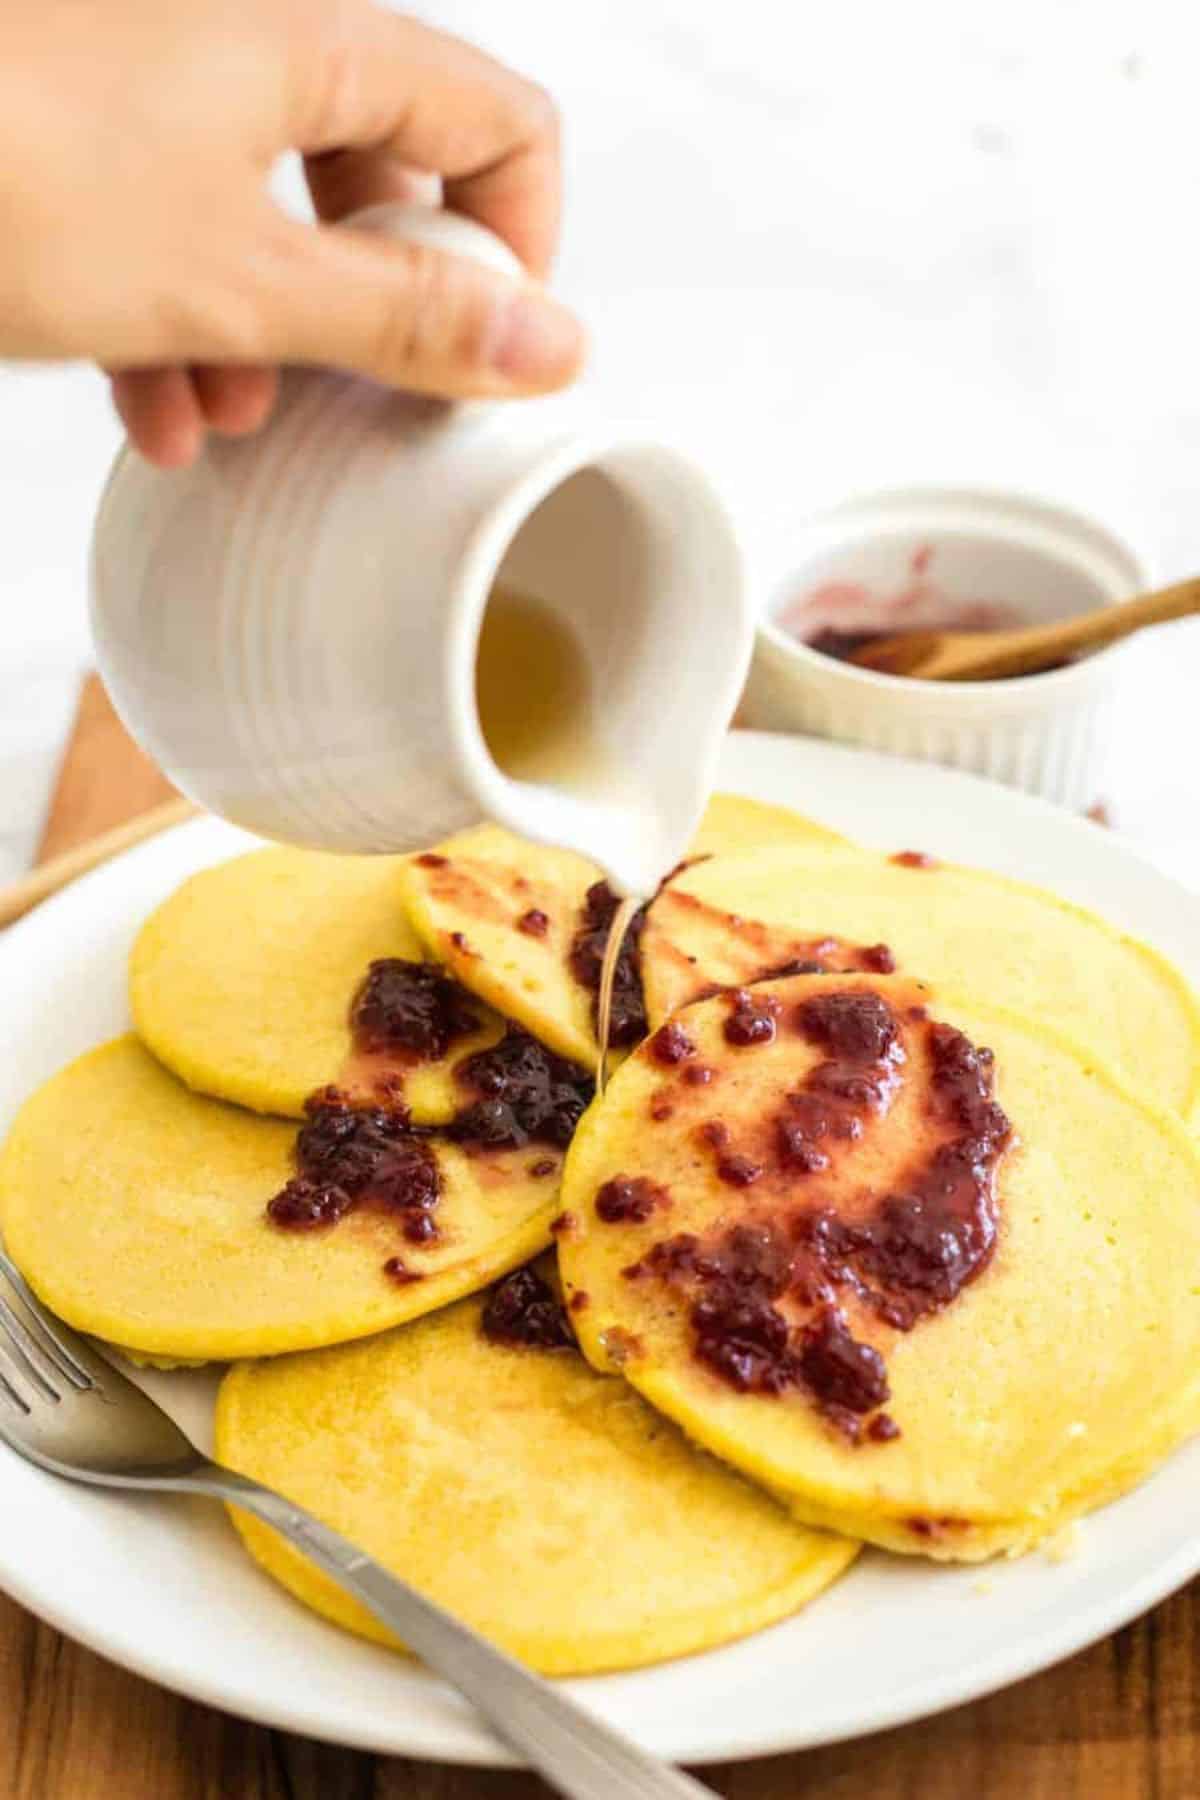 Delicious corn flour pancakes drizzled with syrup.